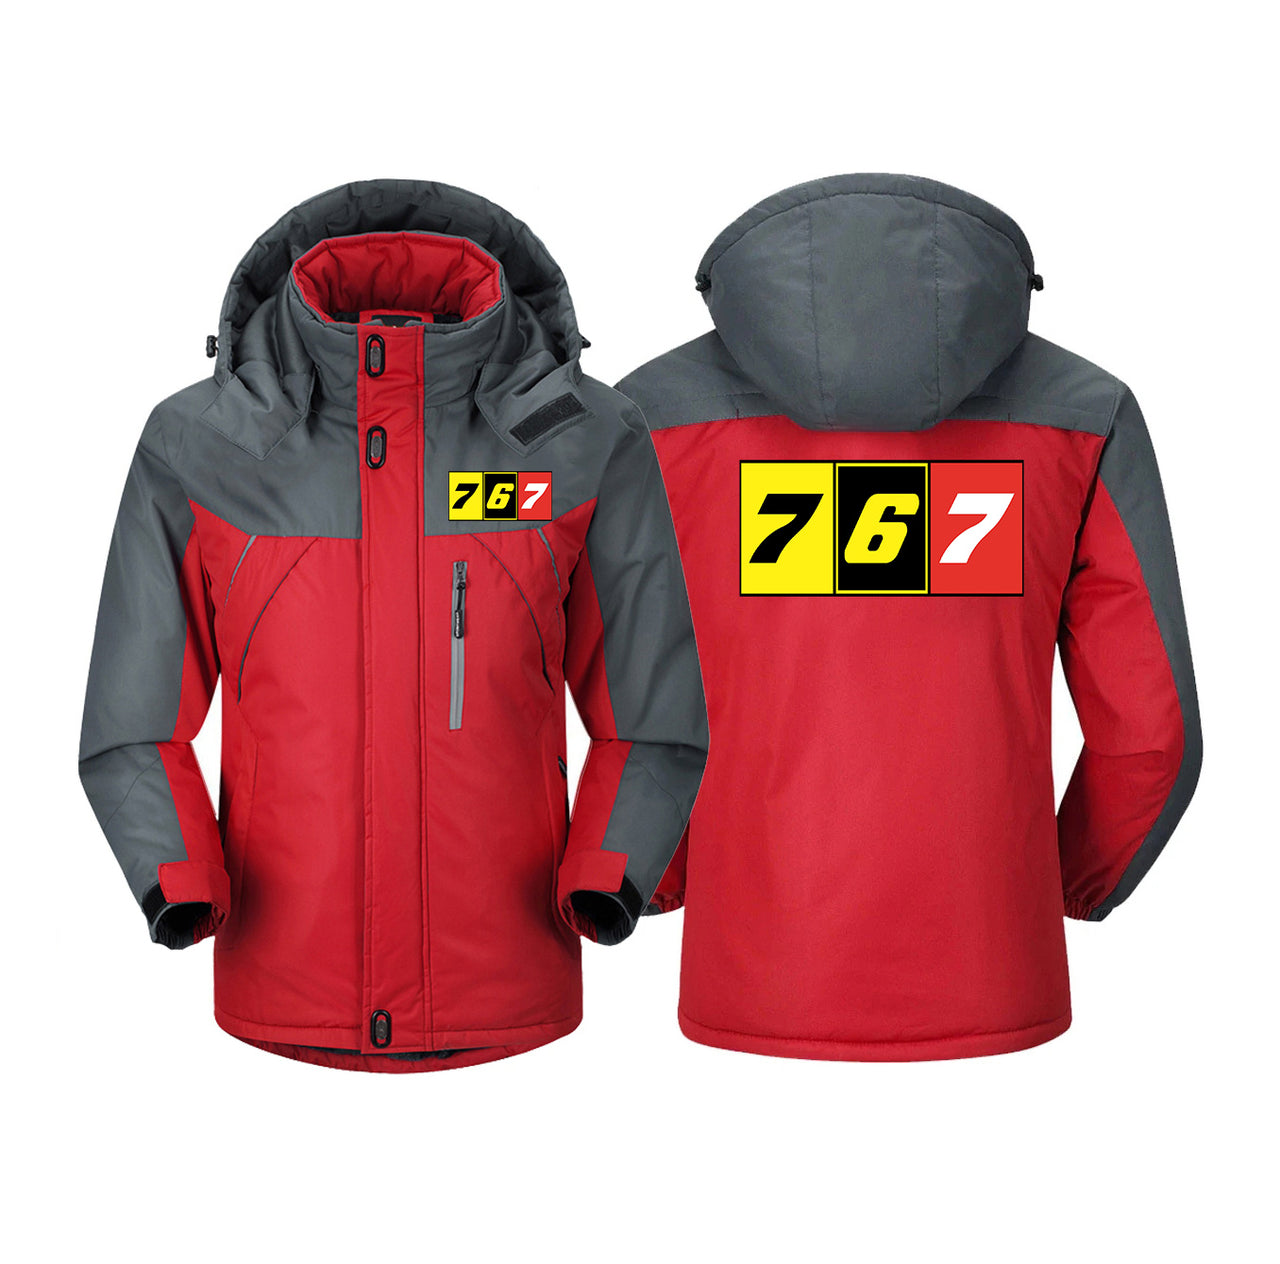 Flat Colourful 767 Designed Thick Winter Jackets